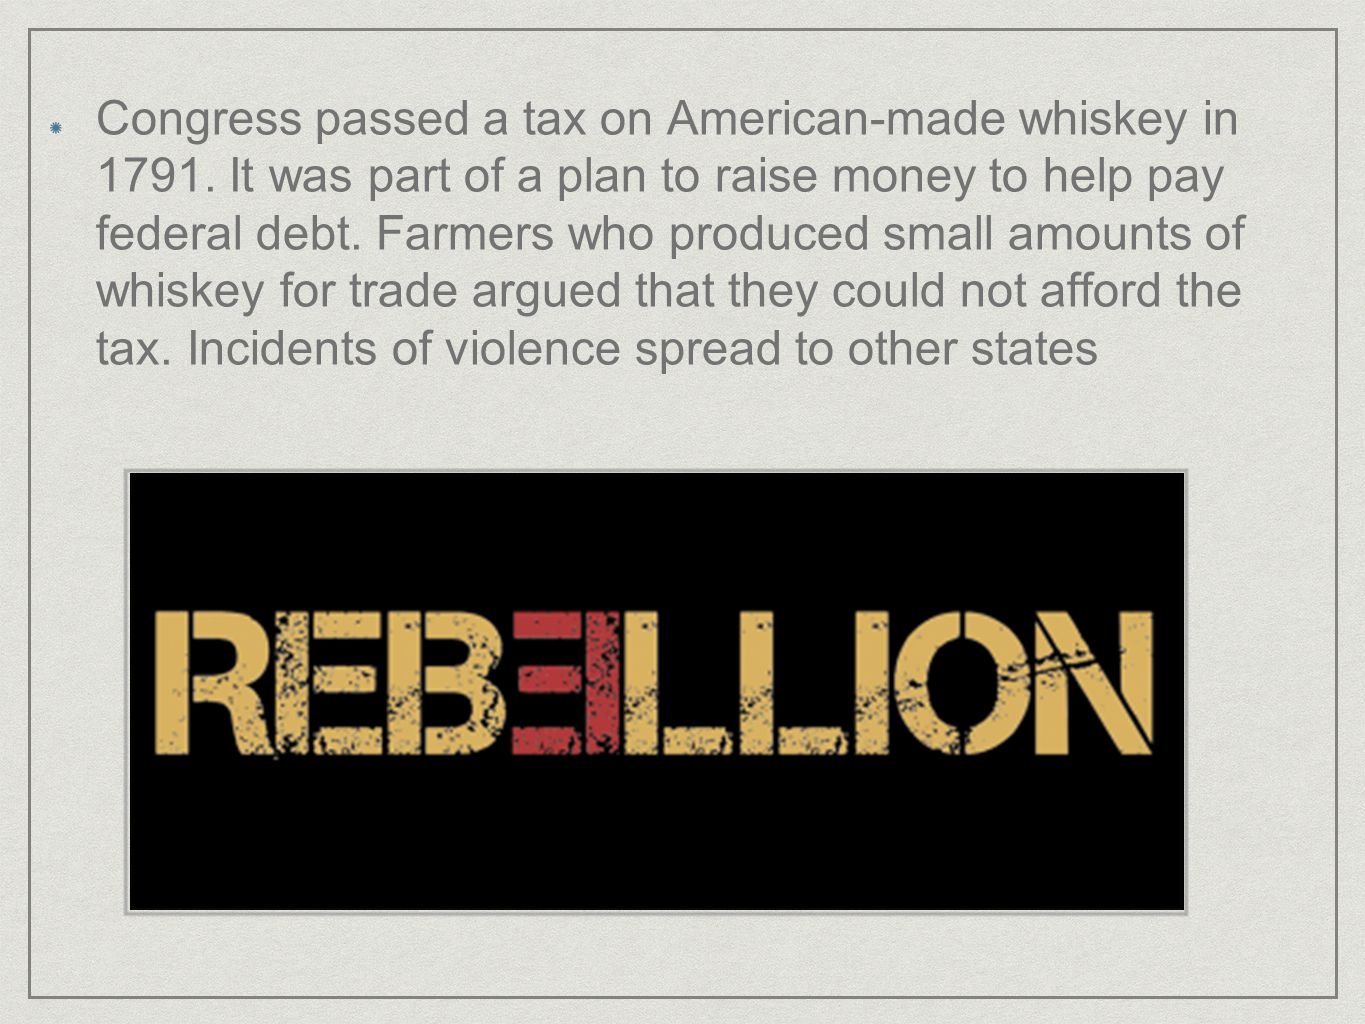 Congress passed a tax on American-made whiskey in 1791.